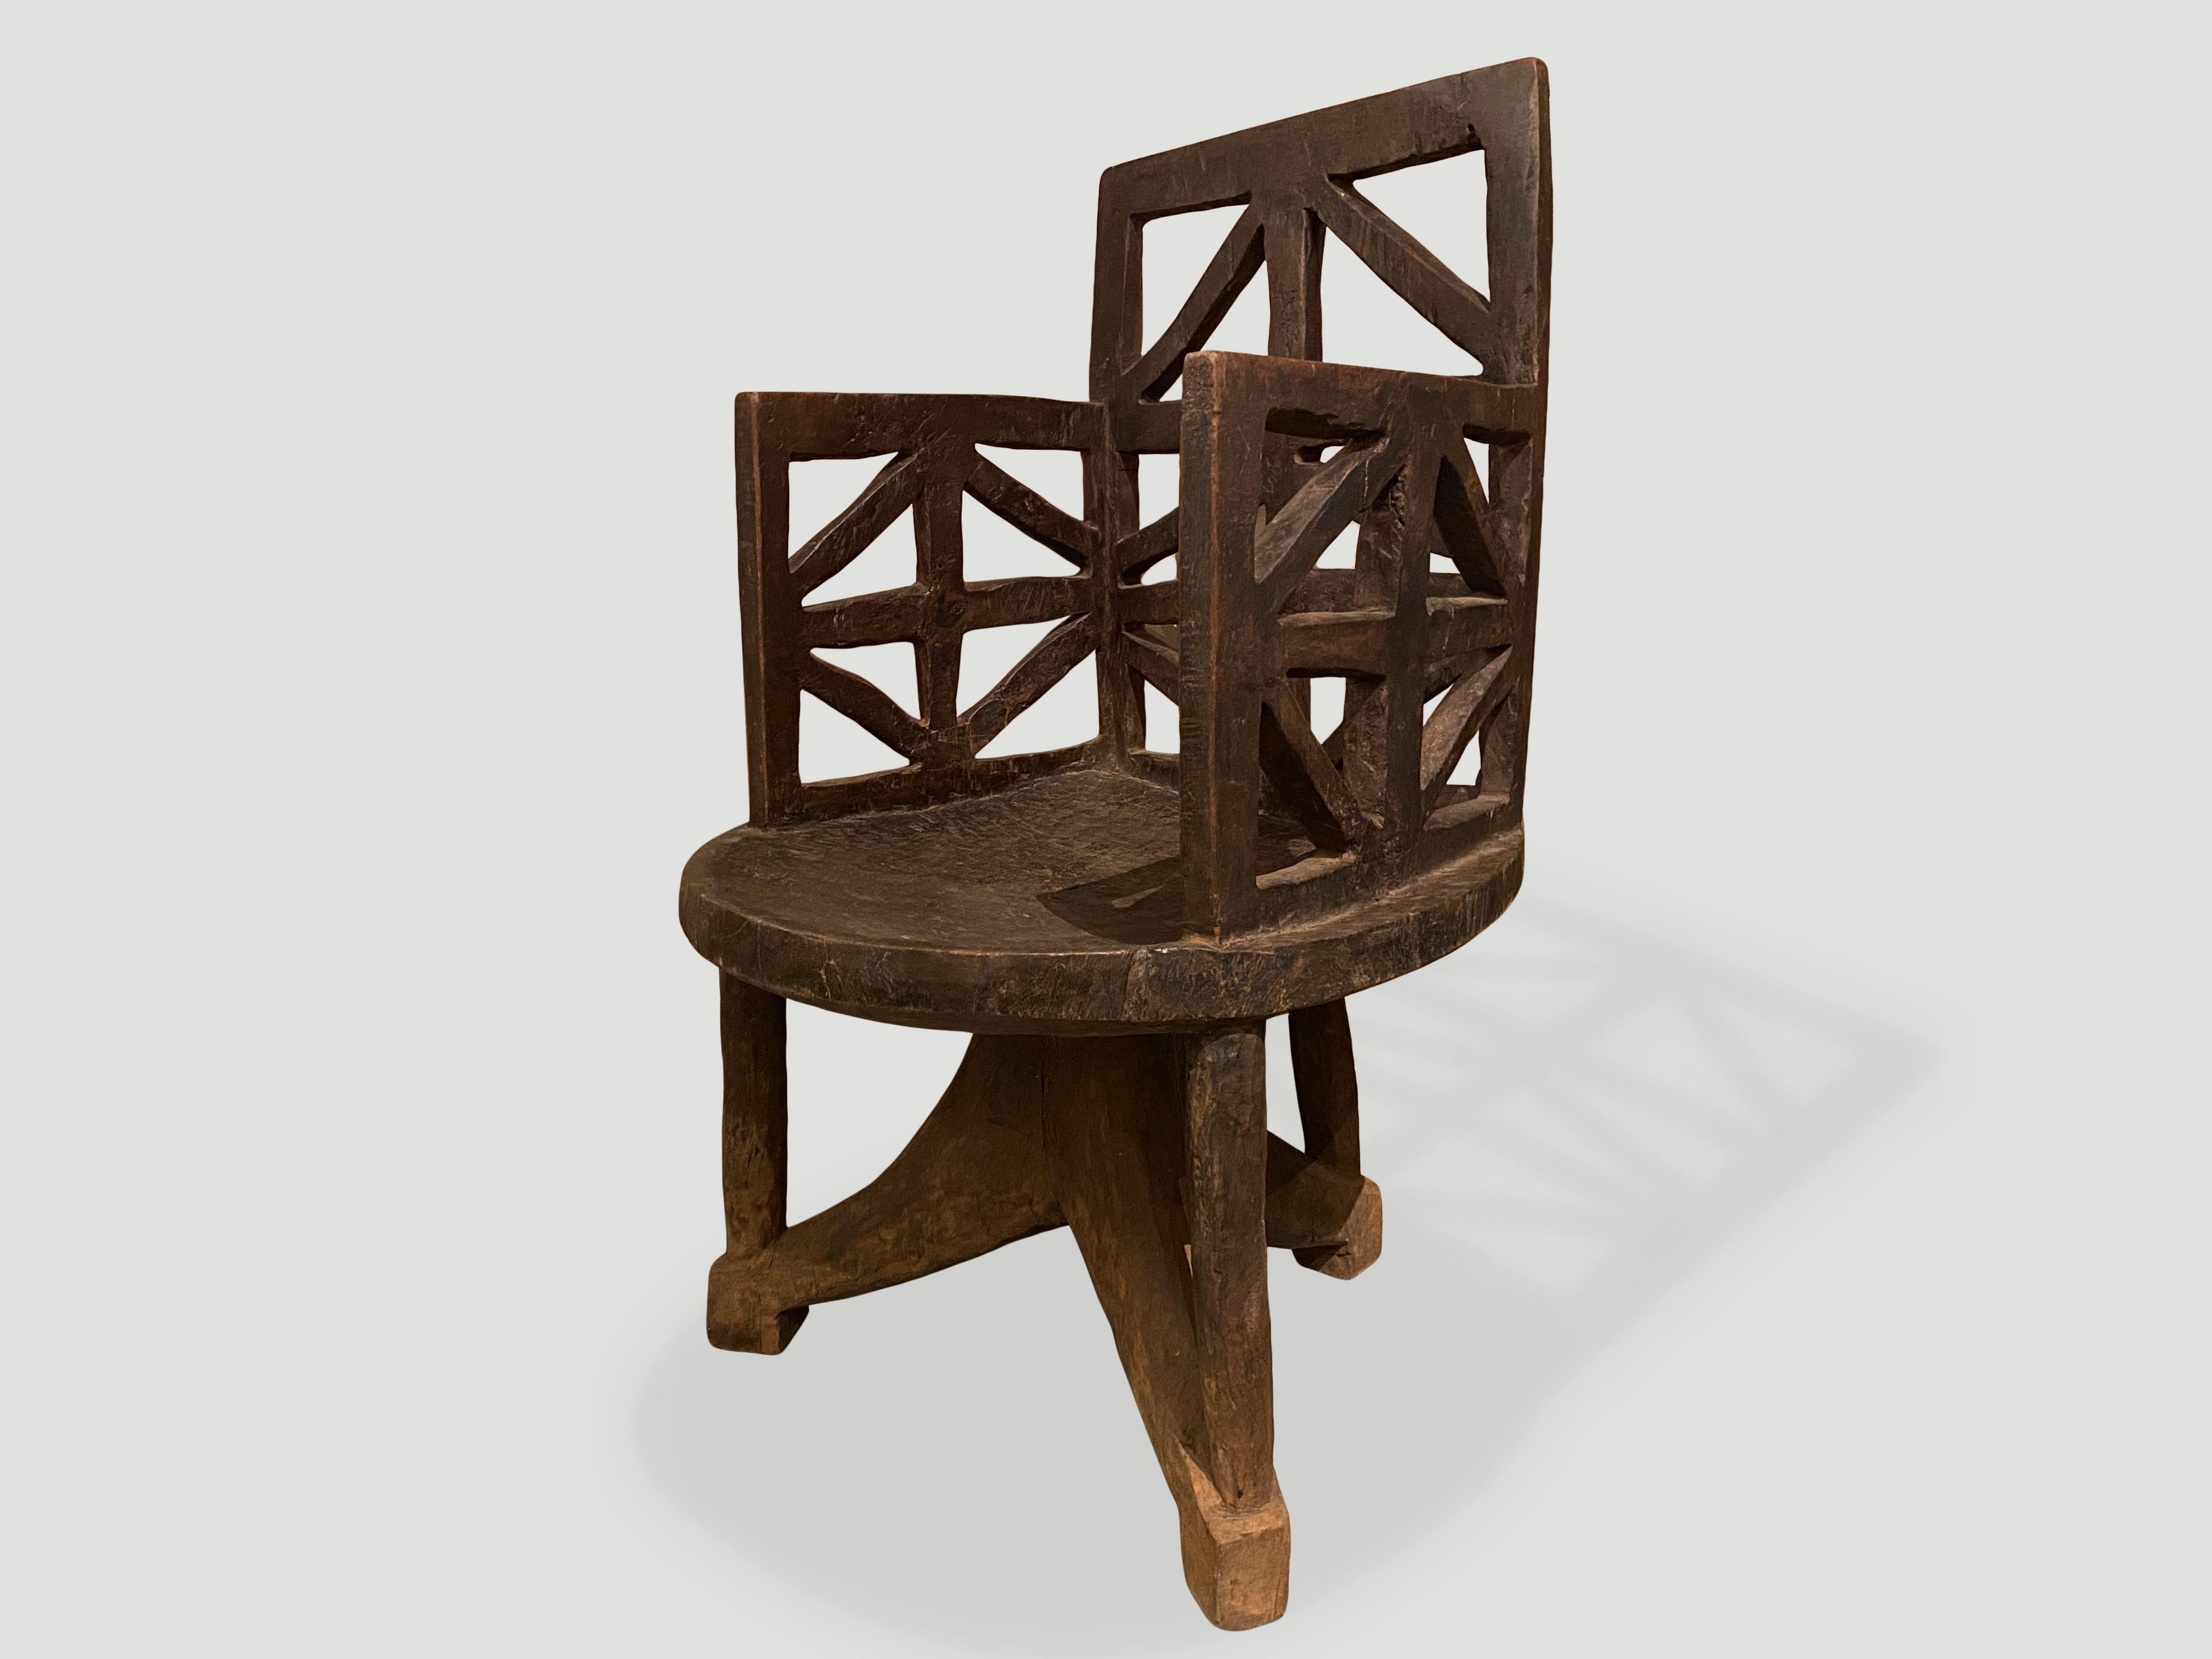 Beautiful hand carved wooden chair from the Western Ethiopian Empire. A slightly concave seat sits on a tripod base connected by slender rods. The high rectangular back rest and arms have a geometric design. Carved out of a single block of wood.